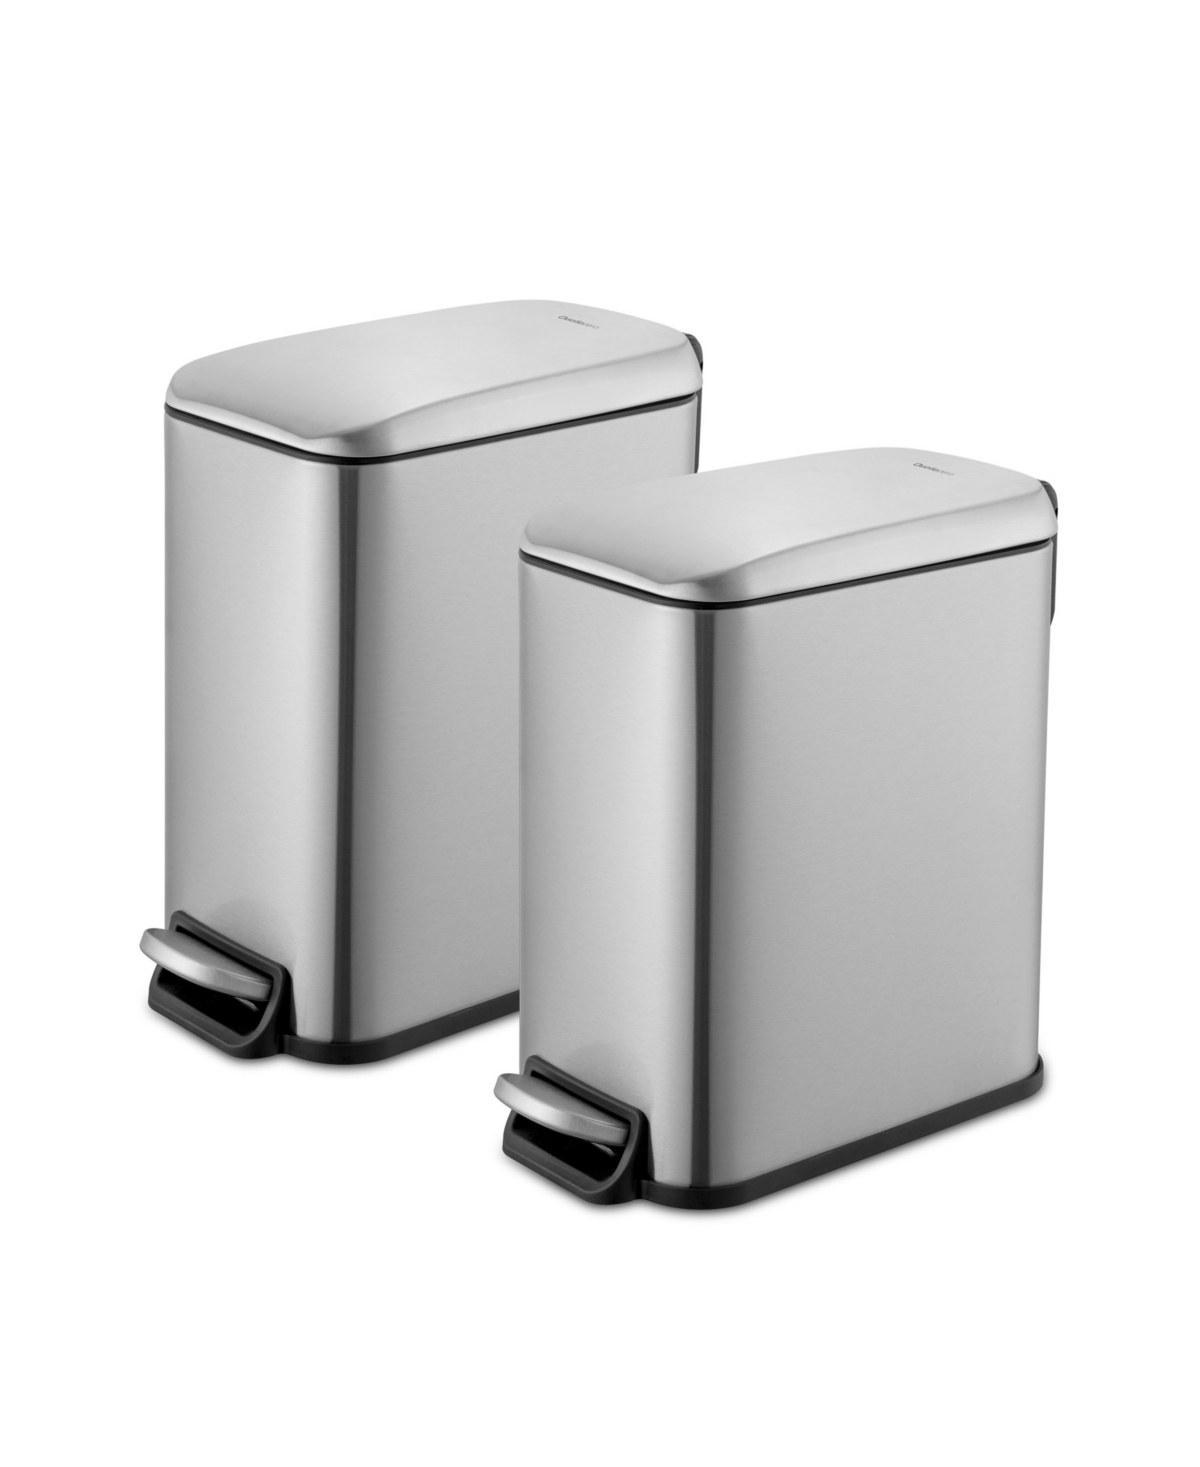 Qualiazero Two 1.3 Gallon Slim Step On Trash Can Set, 2 Pieces, Stainless Steel, Twin Pack In Silver